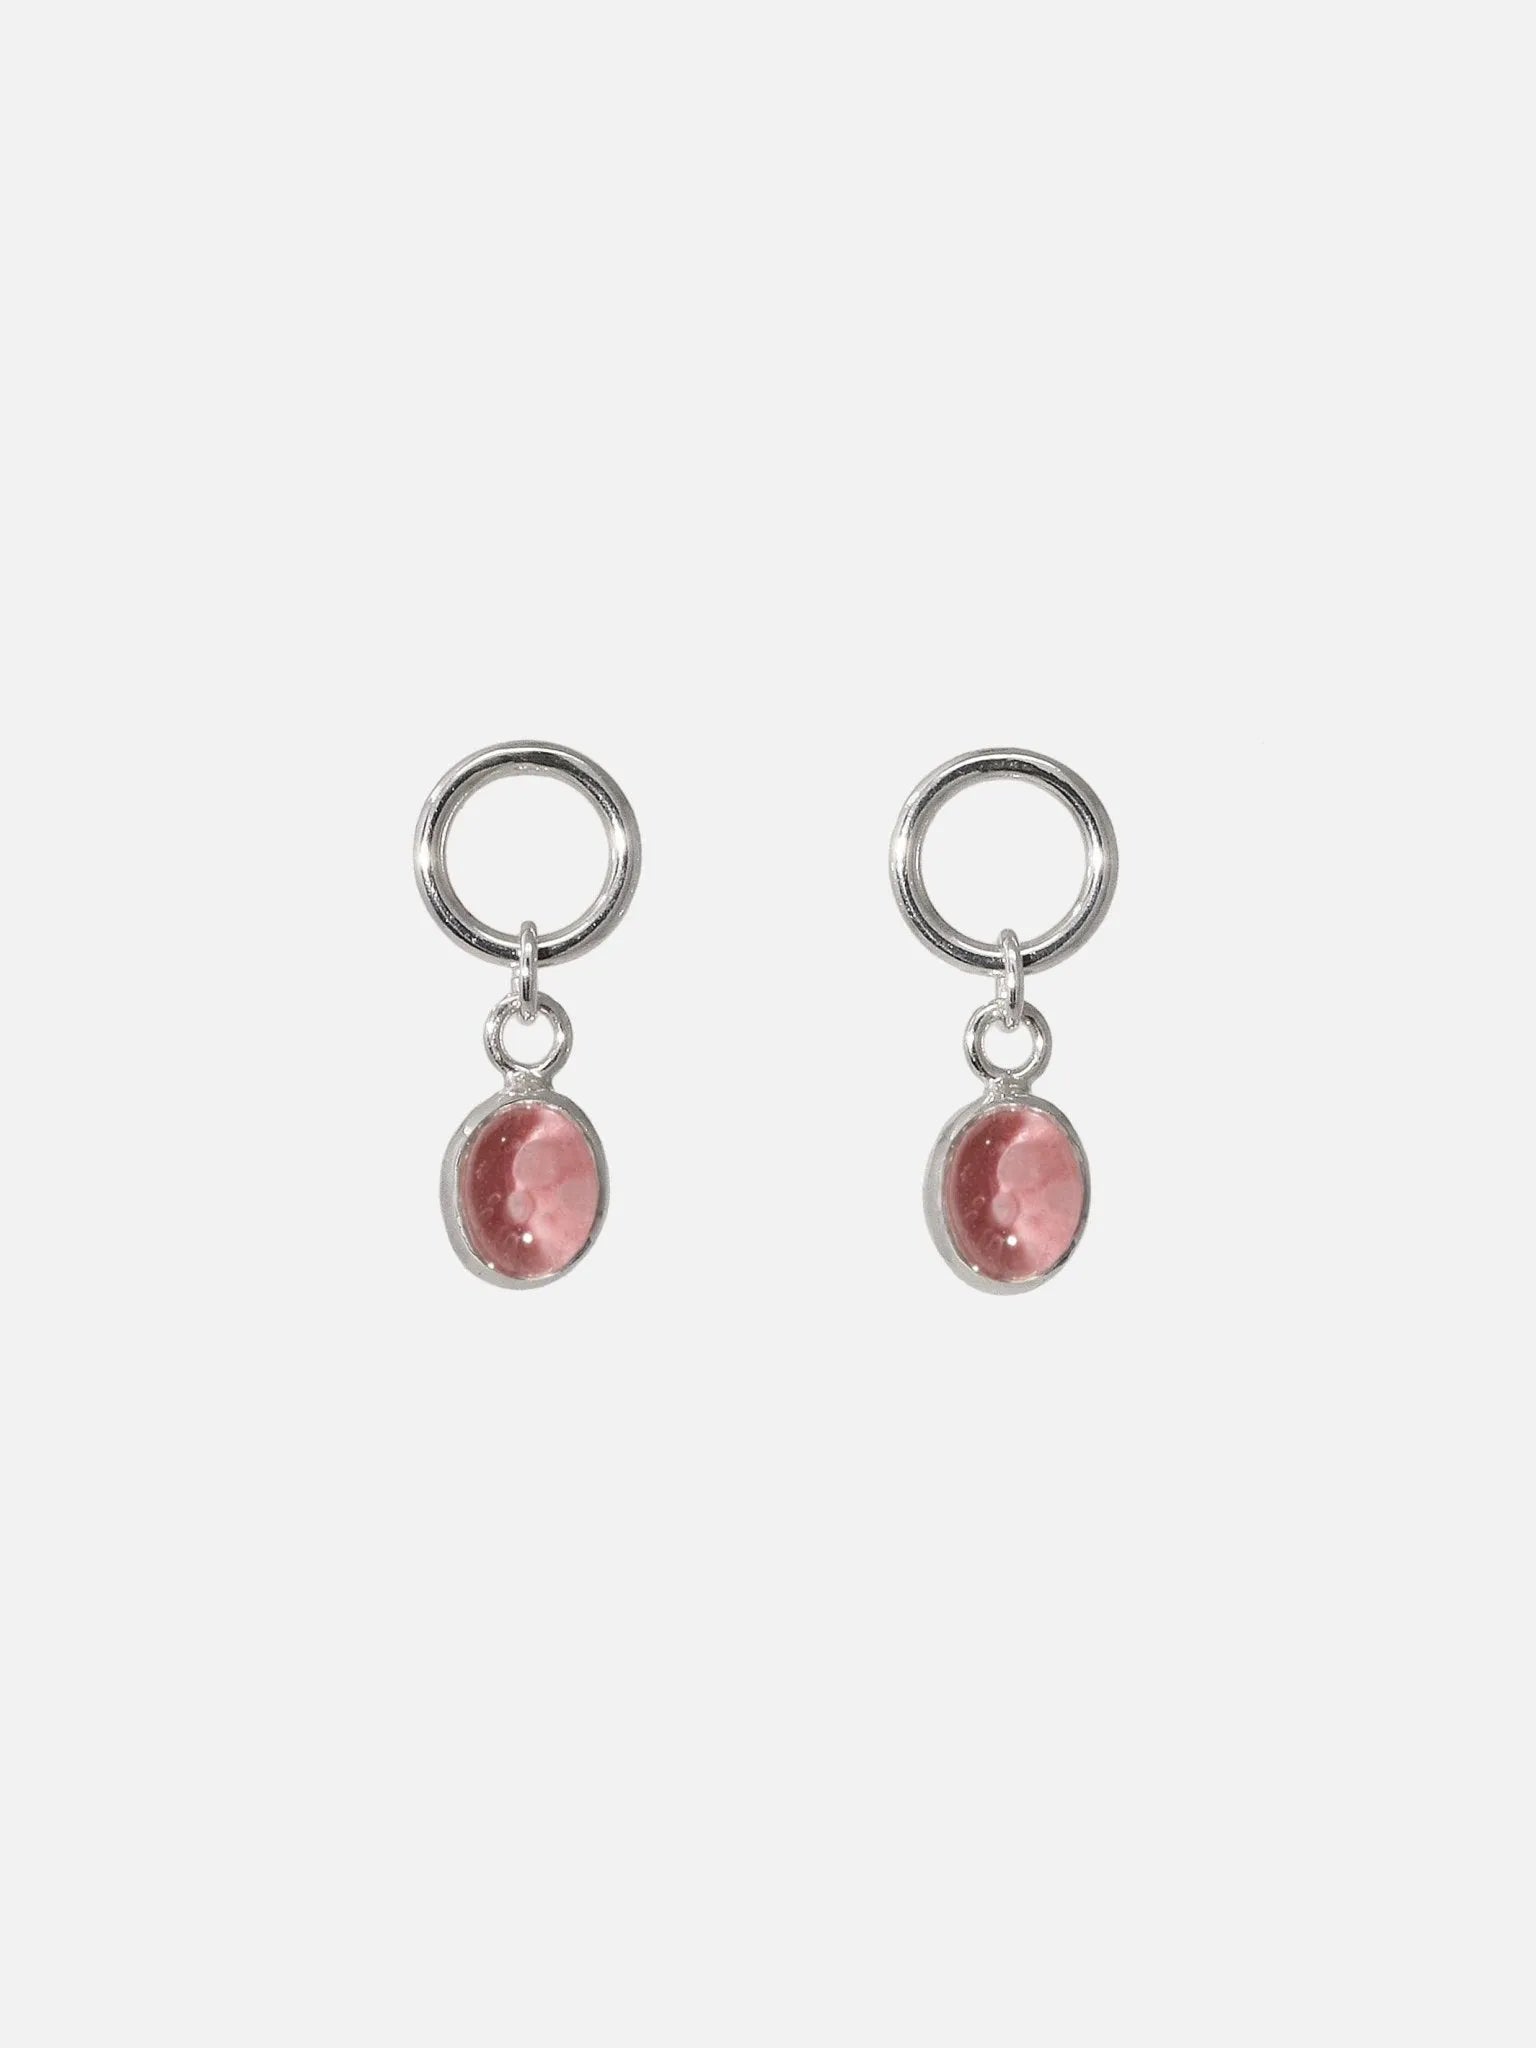 Oval Dangling Earrings - At Present